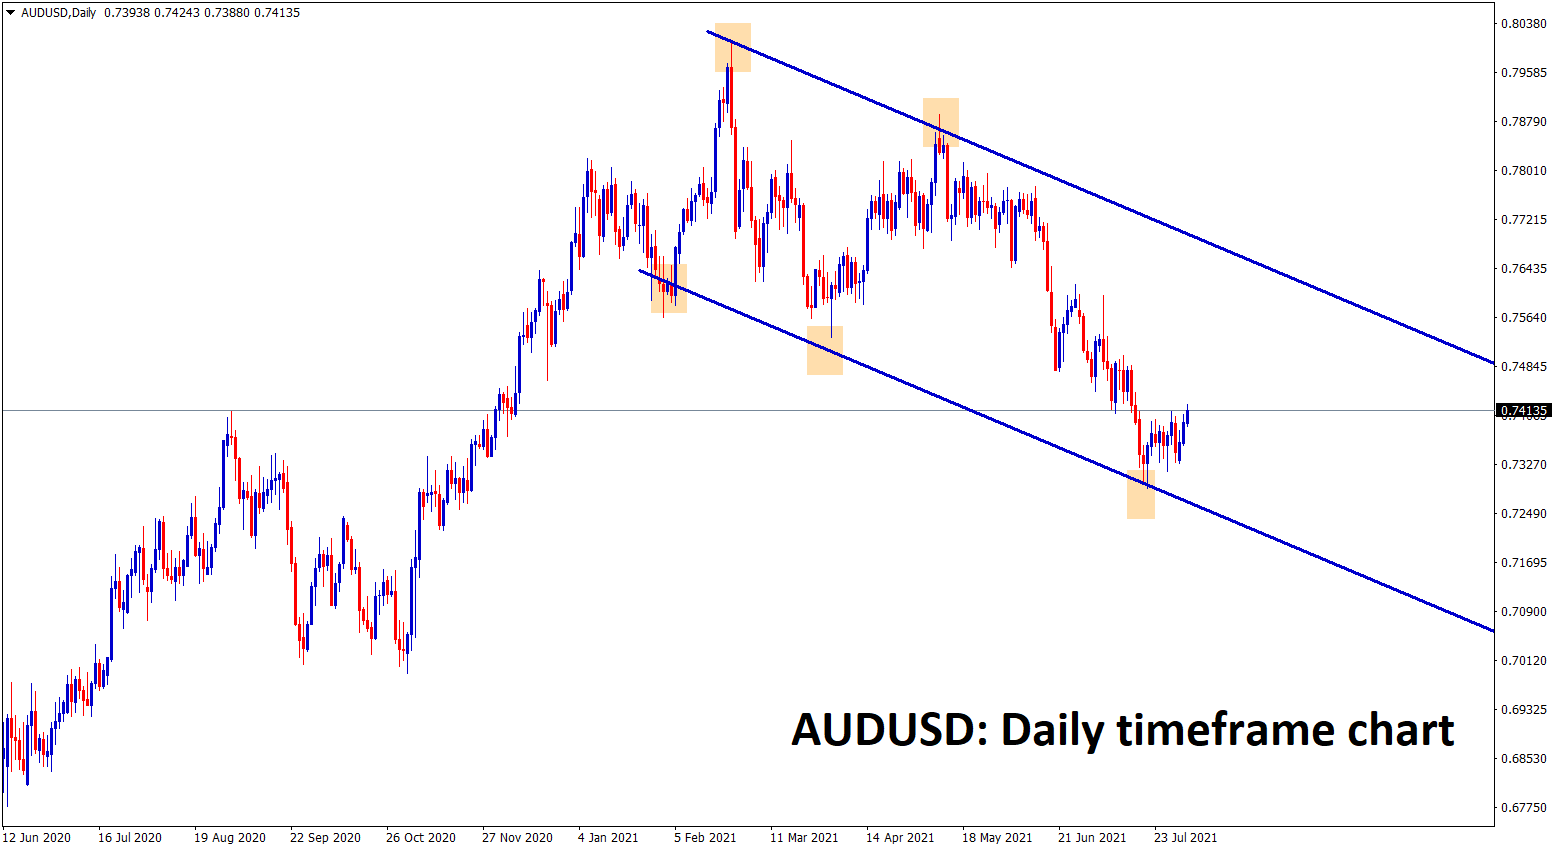 AUDUSD is bouncing back from the lower low level of the downtrend channel